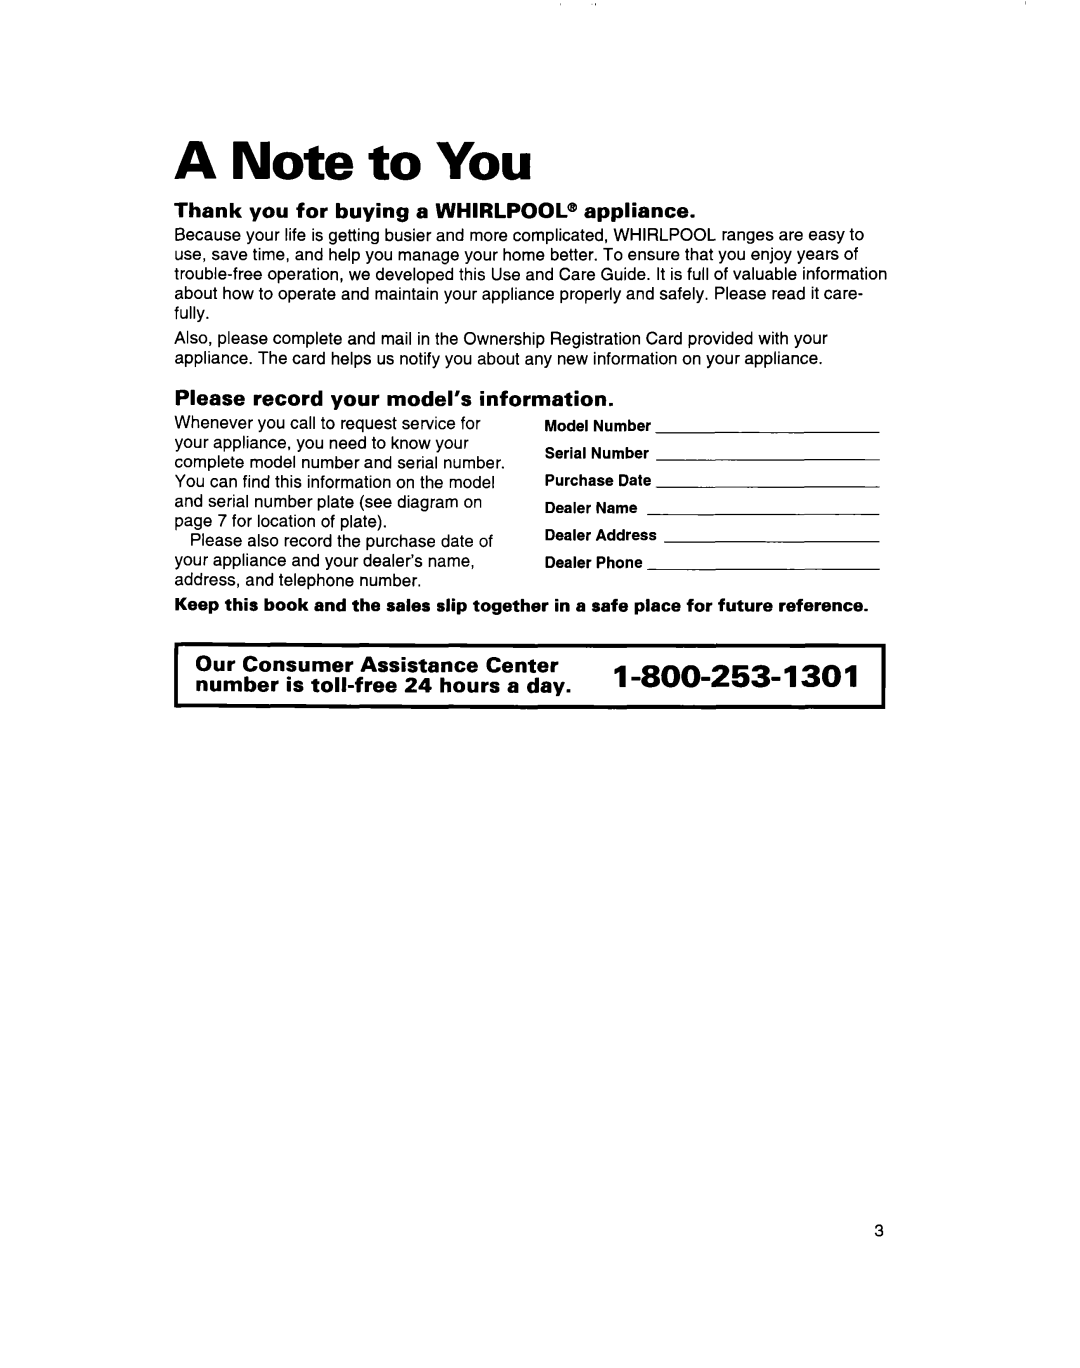 Whirlpool RF314BBD manual A Note to You, l-800-253 